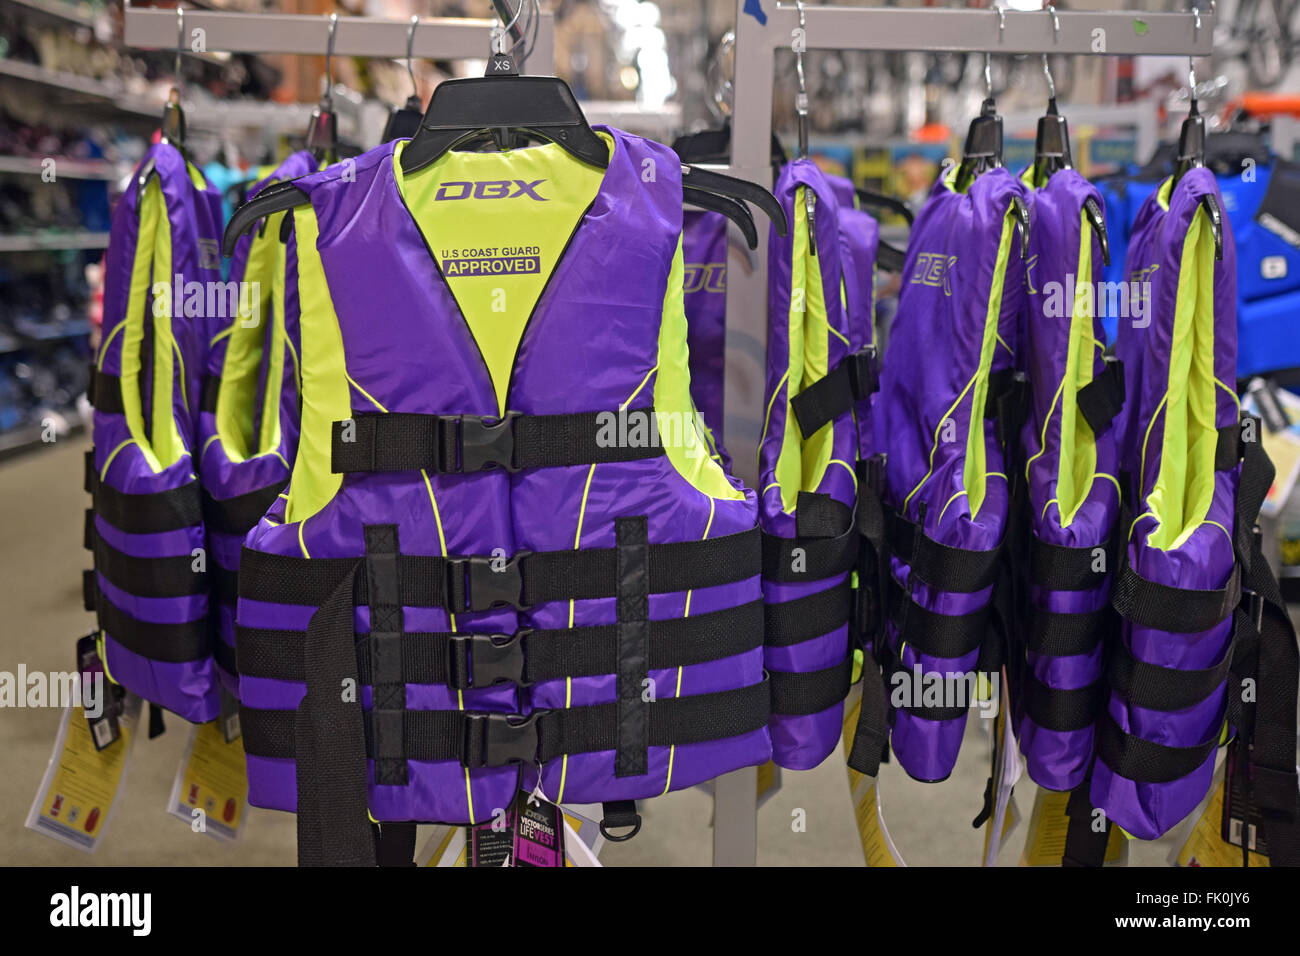 Colorful DBX purple lifejackets for sale at Dick's Sporting Goods at the Roosevelt Field Mall in Garden City, Long Island, NY Stock Photo